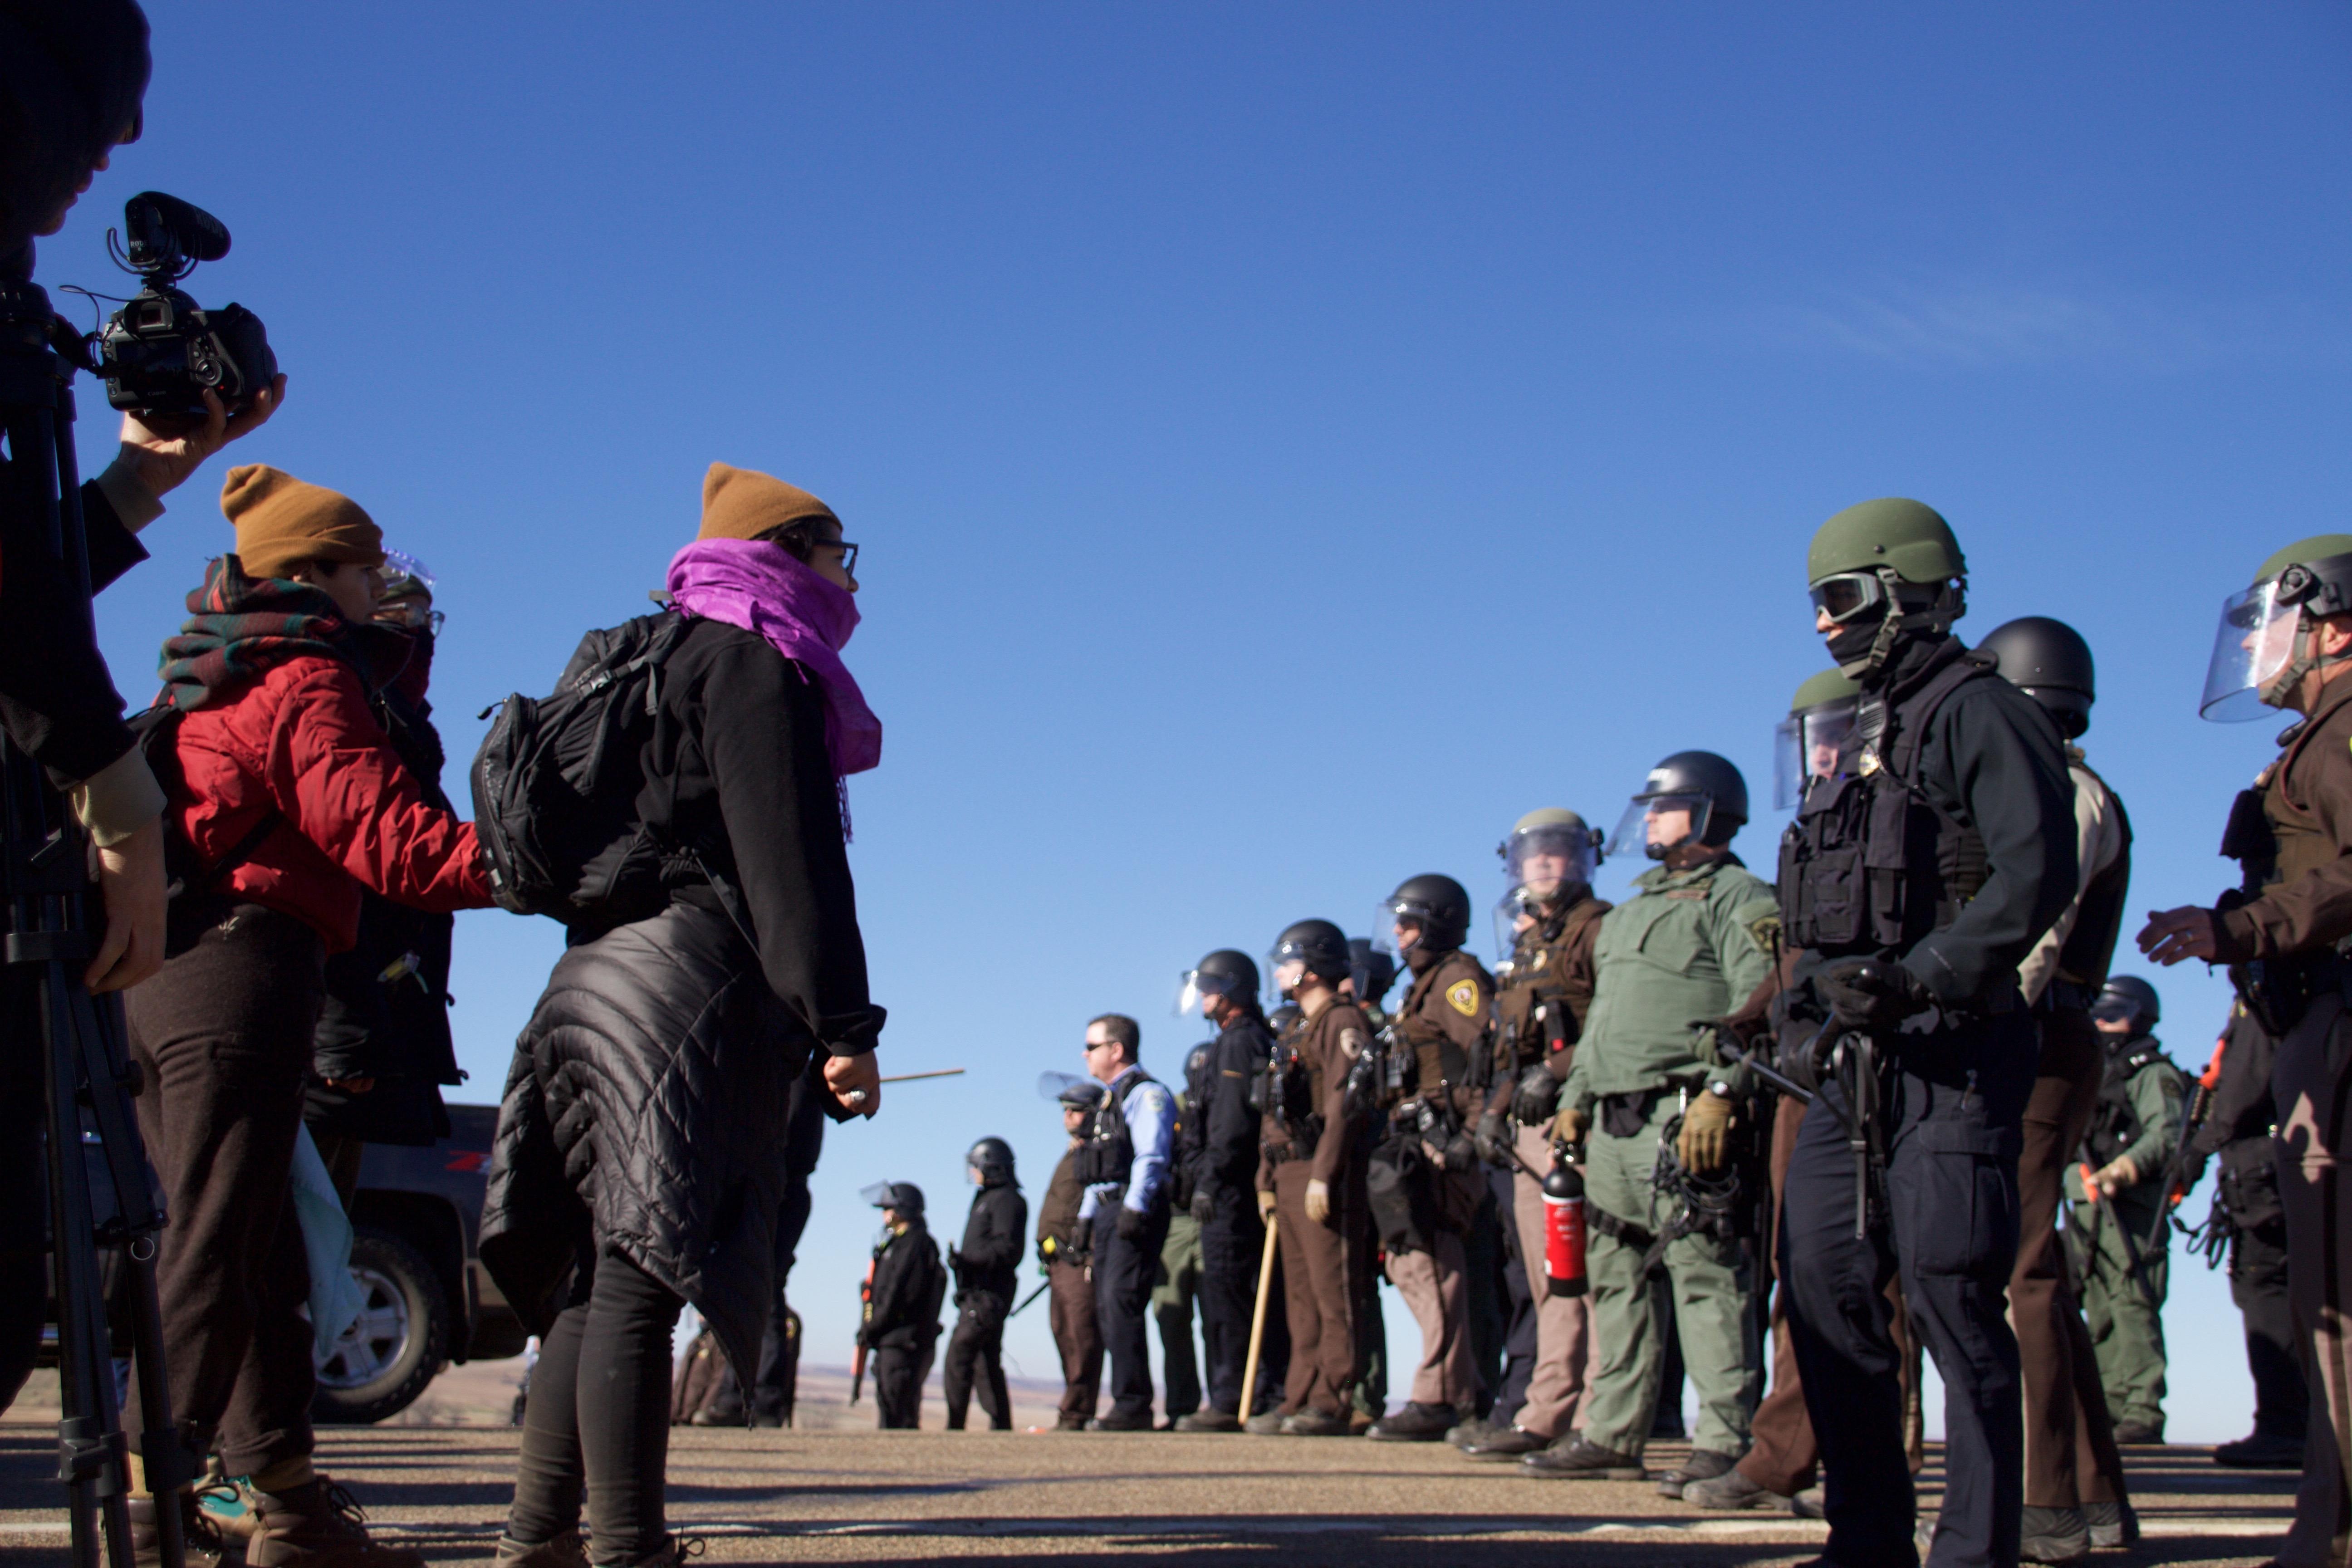 Pipeline opponents hold the line on Veteran's Day, 2016. At the camp, hundreds of Native American veterans marched as close as they could get to the pipeline construction site and prayed. Image Credit: Greg Harman